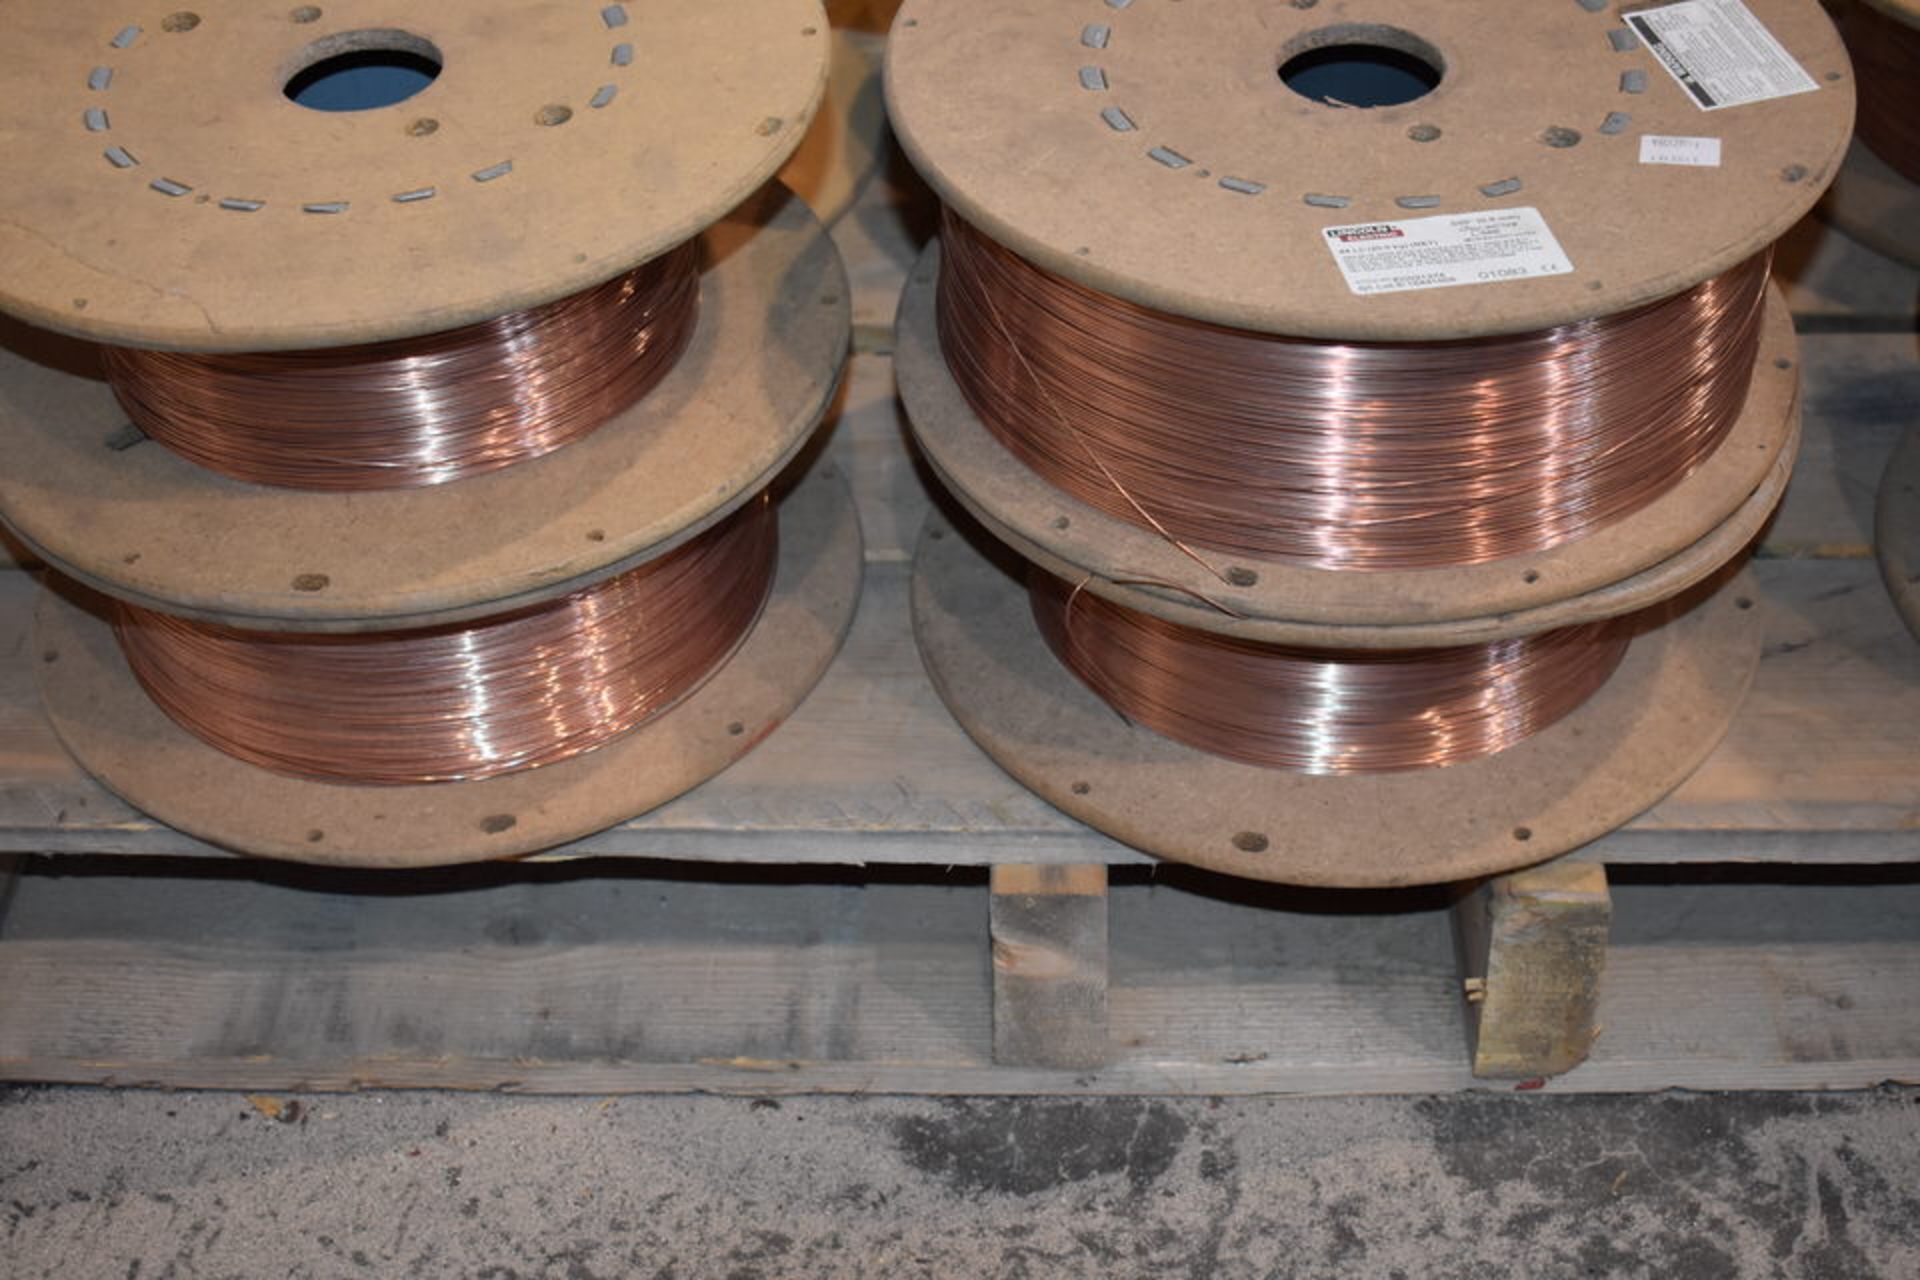 APPROX (16) SPOOLS OF LINCOLN MICROGUARDL-56 SUPER ARC WELDING WIRE - Image 2 of 2